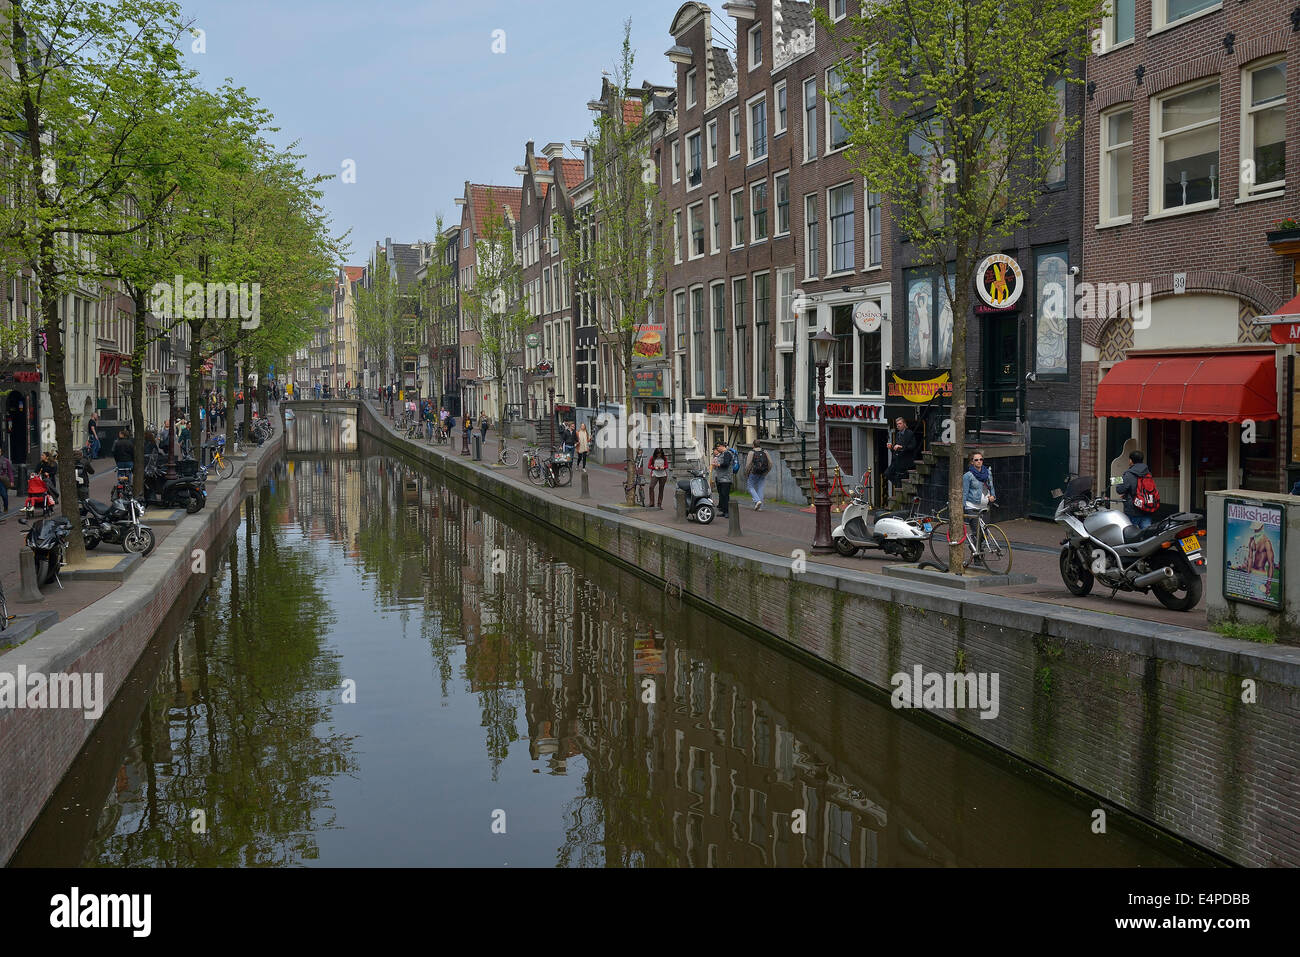 On Oudezijds Achterburgwal canal, Amsterdam, Holland Stock Photo